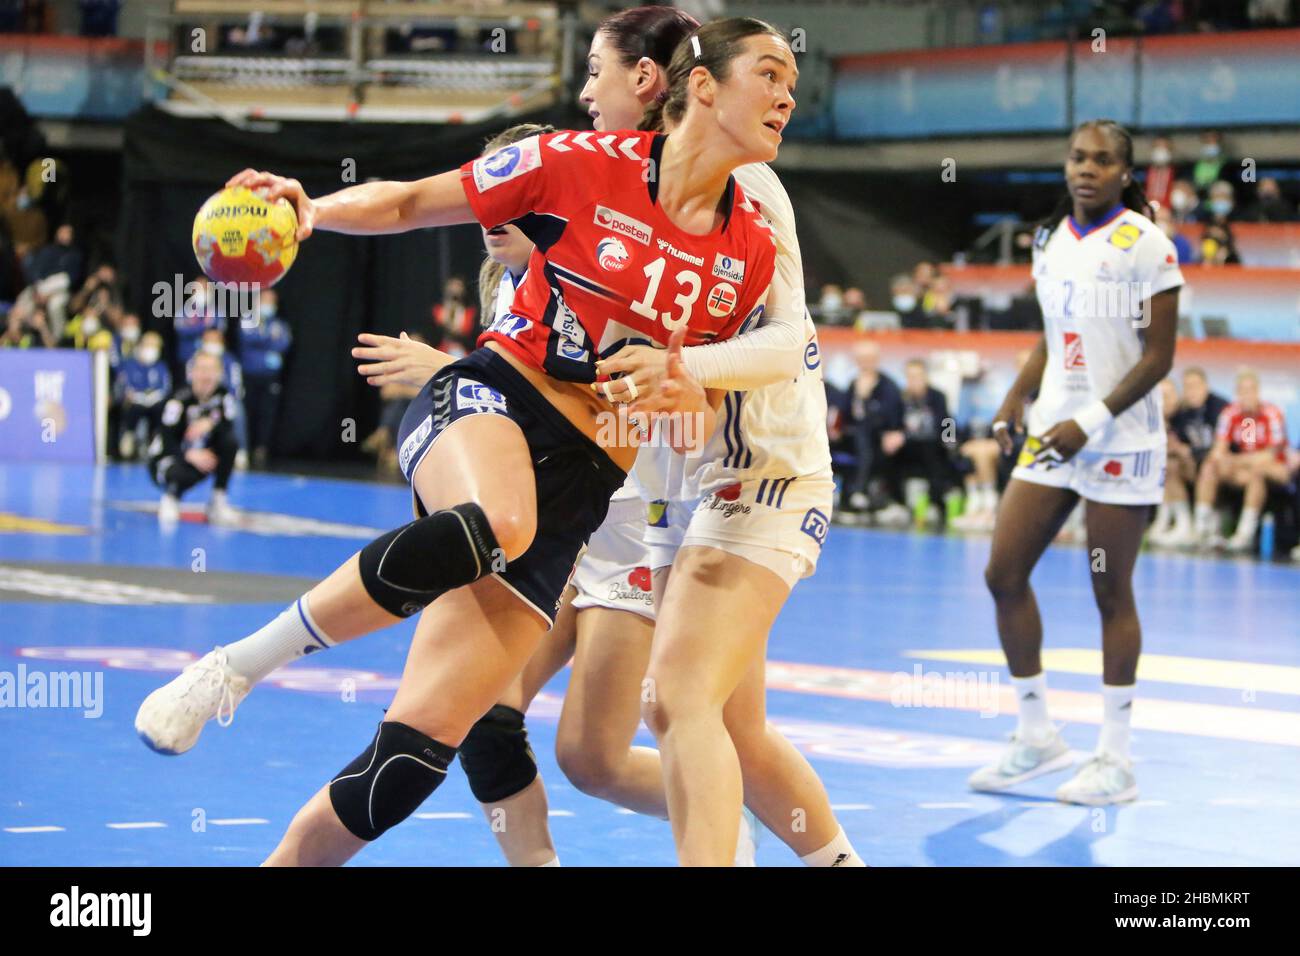 Kari Brattset Dale of Norway during the IHF Women's World Championship  2021, final handball match between France and Norway on December 19, 2021  at Palau d'Esports de Granollers in Granollers, Barcelona, Spain -